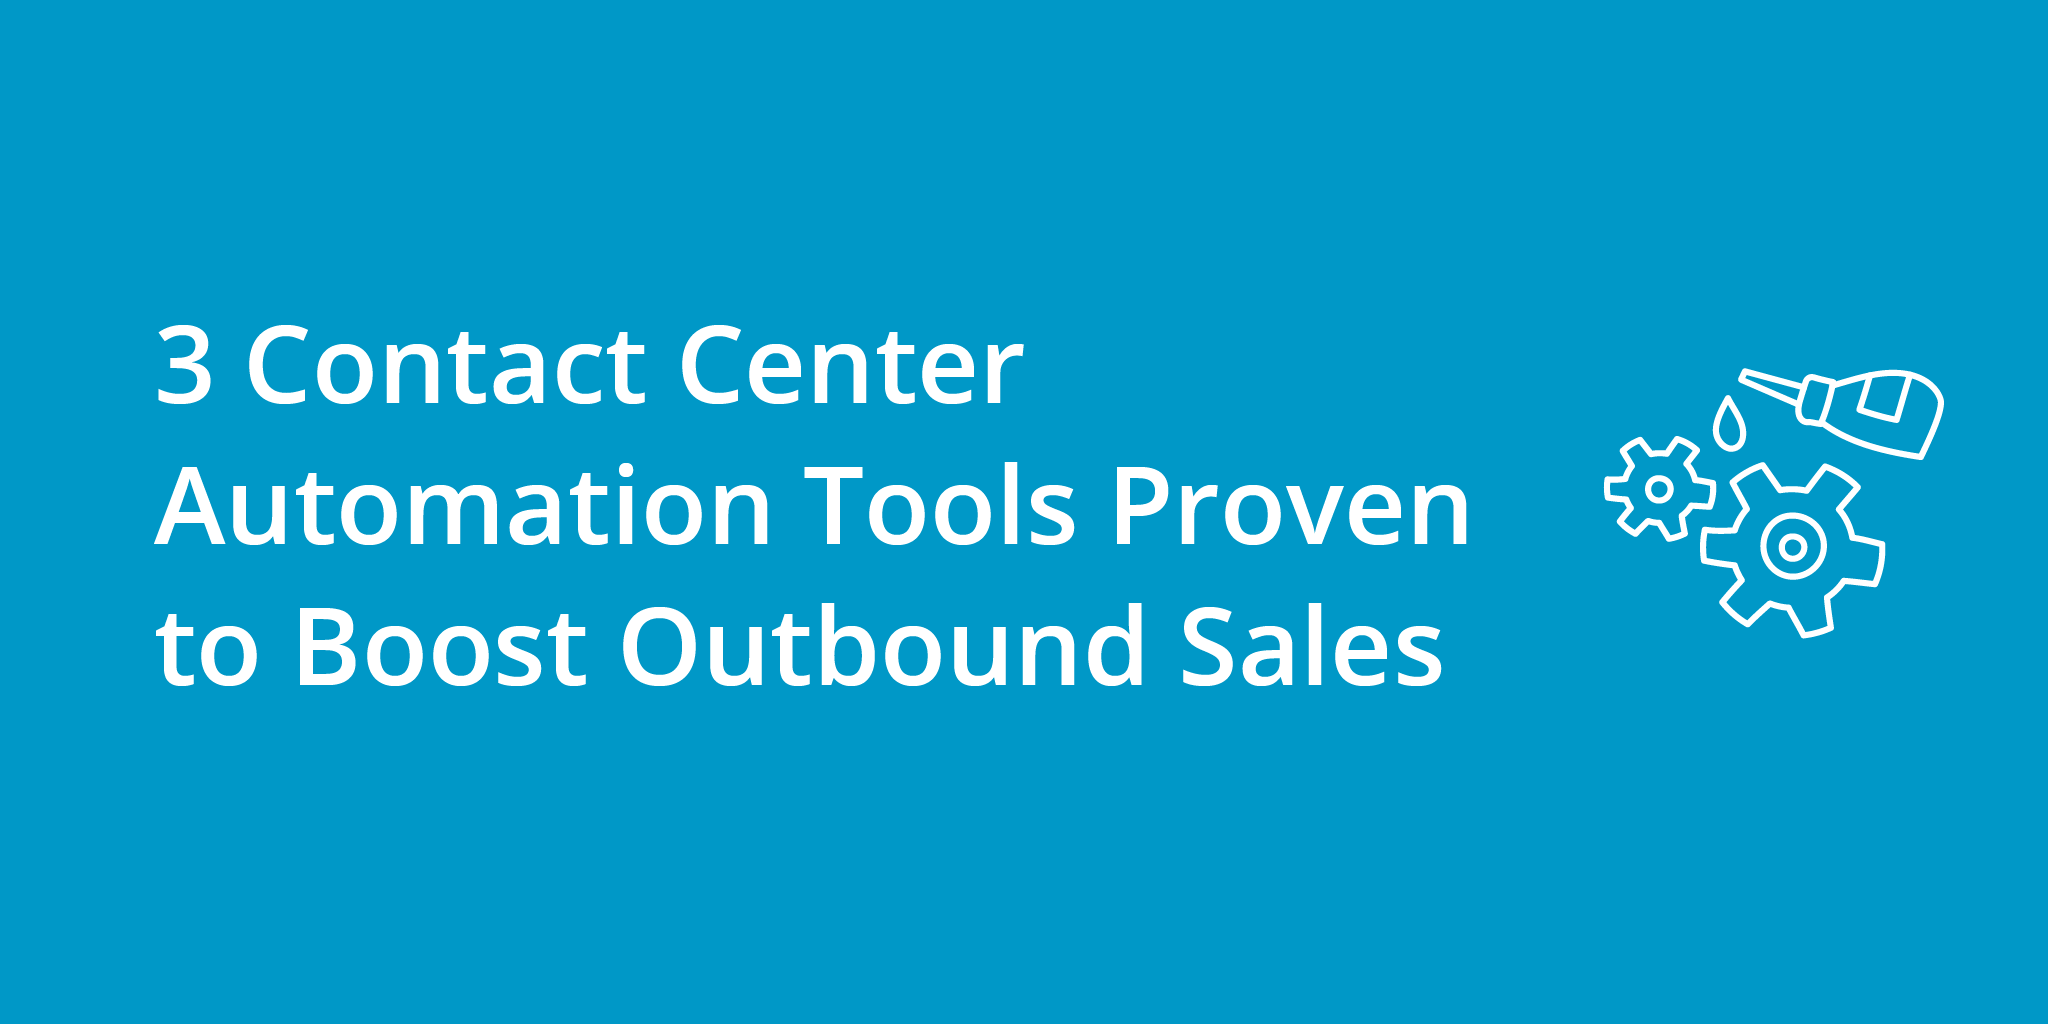 3 Contact Center Automation Tools Proven to Boost Outbound Sales | Telephones for business